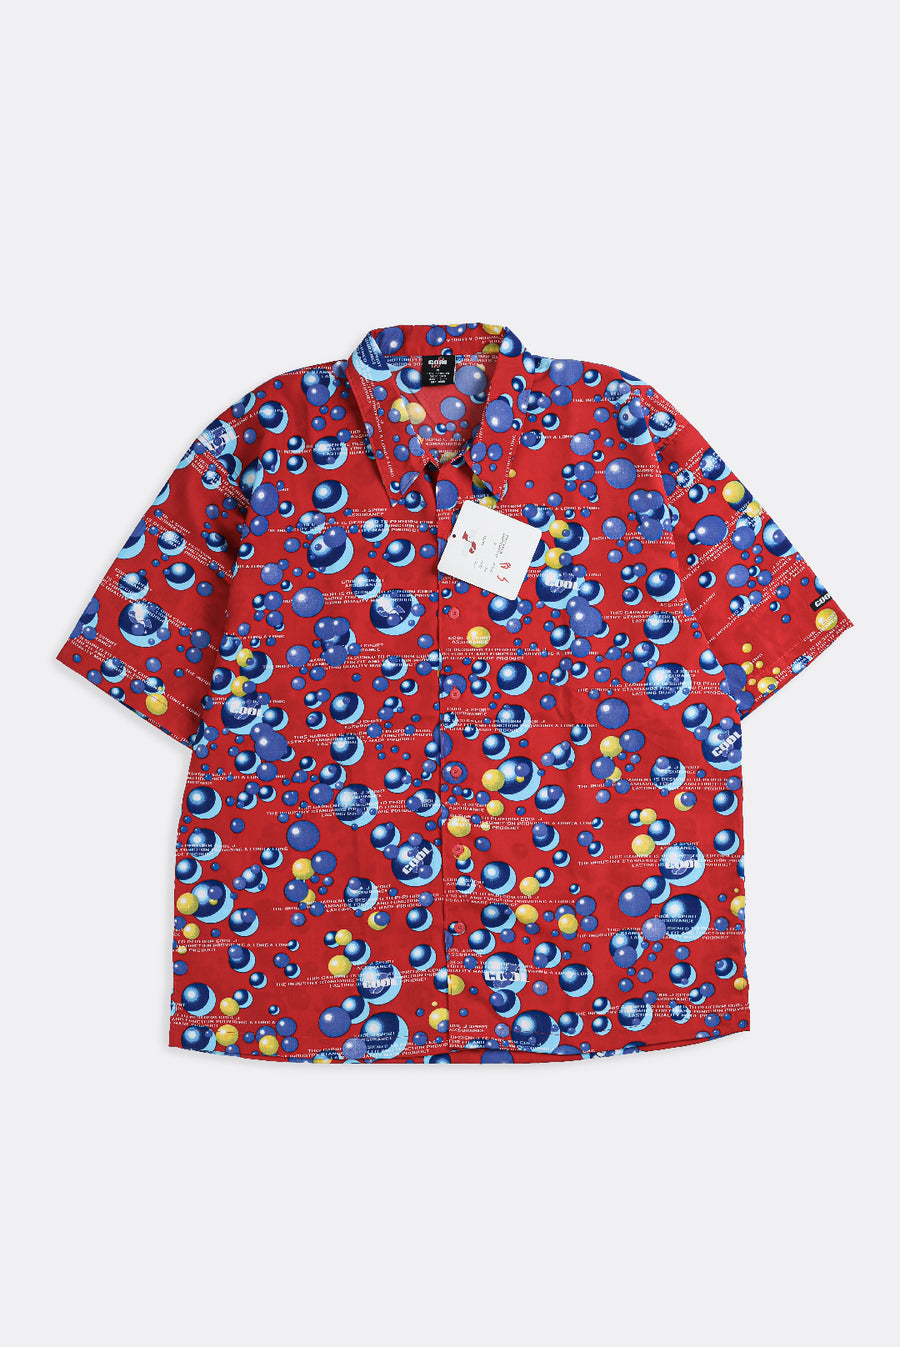 Deadstock Cool J Collared Shirt